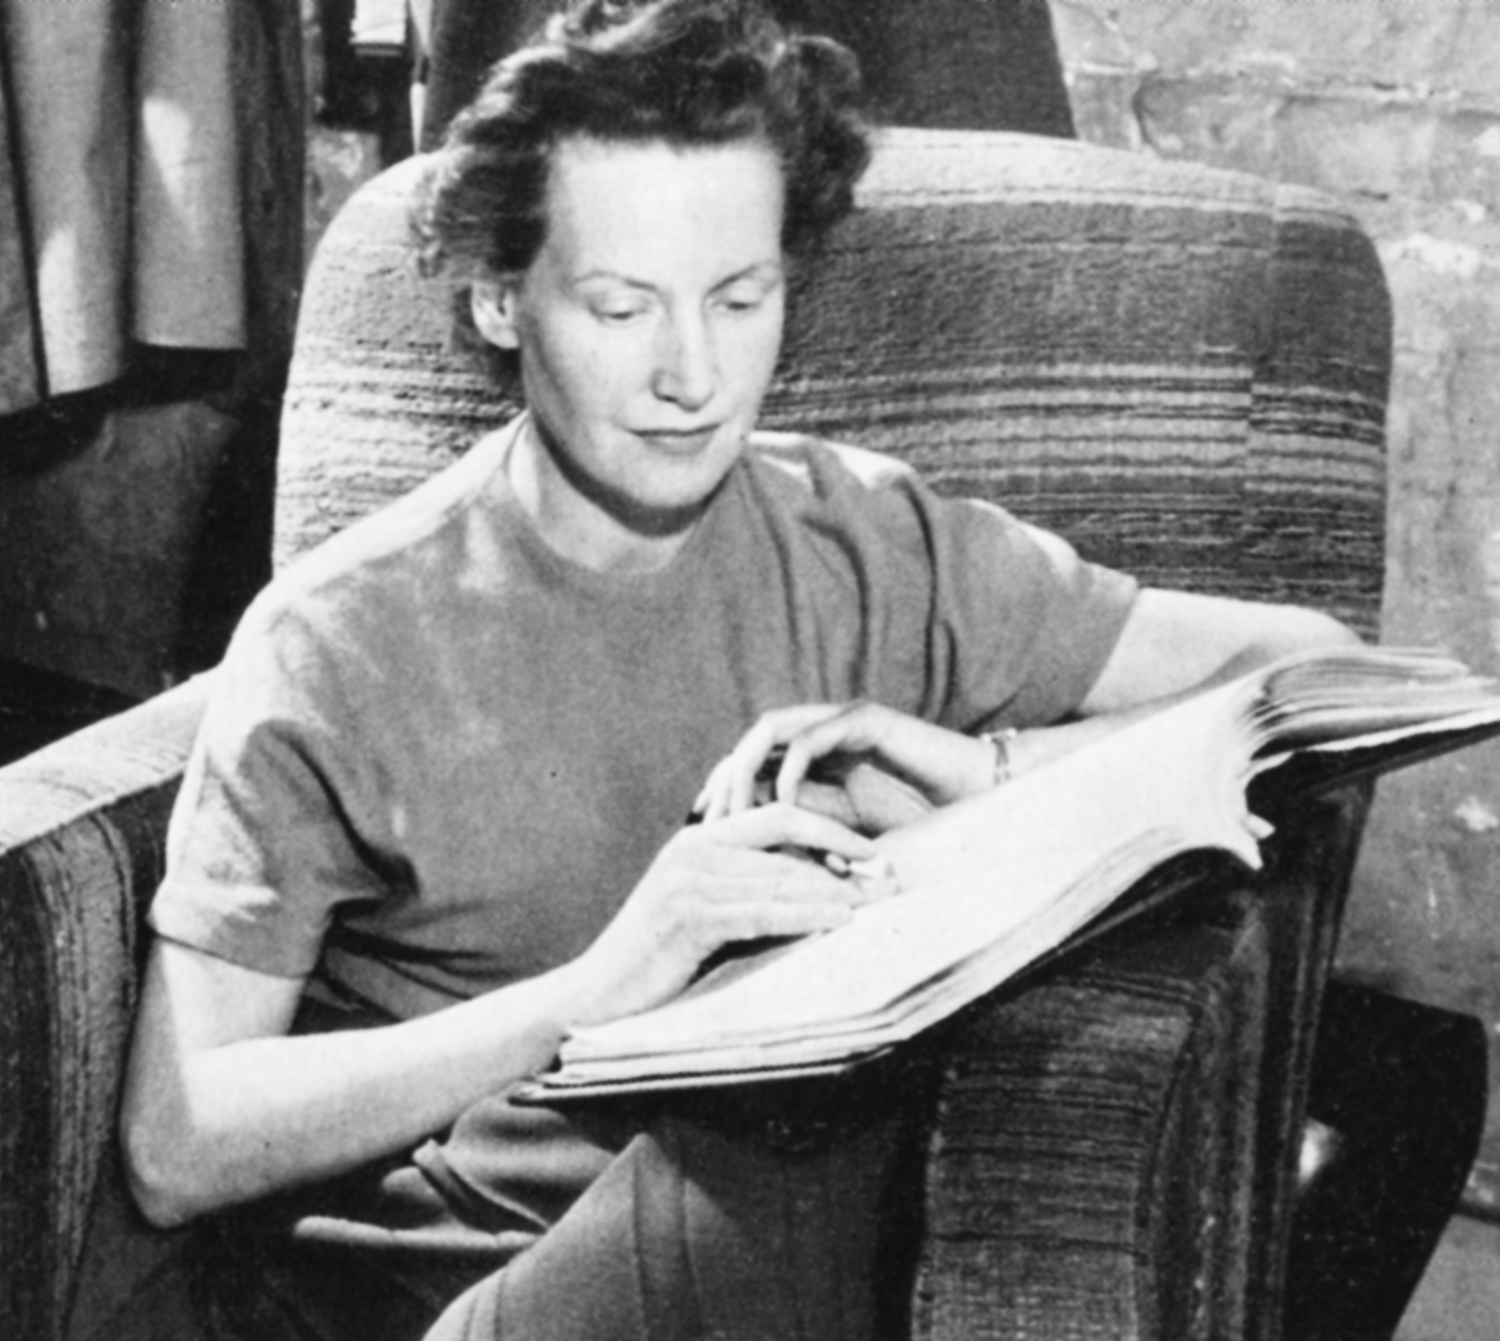 A woman sits with a script book